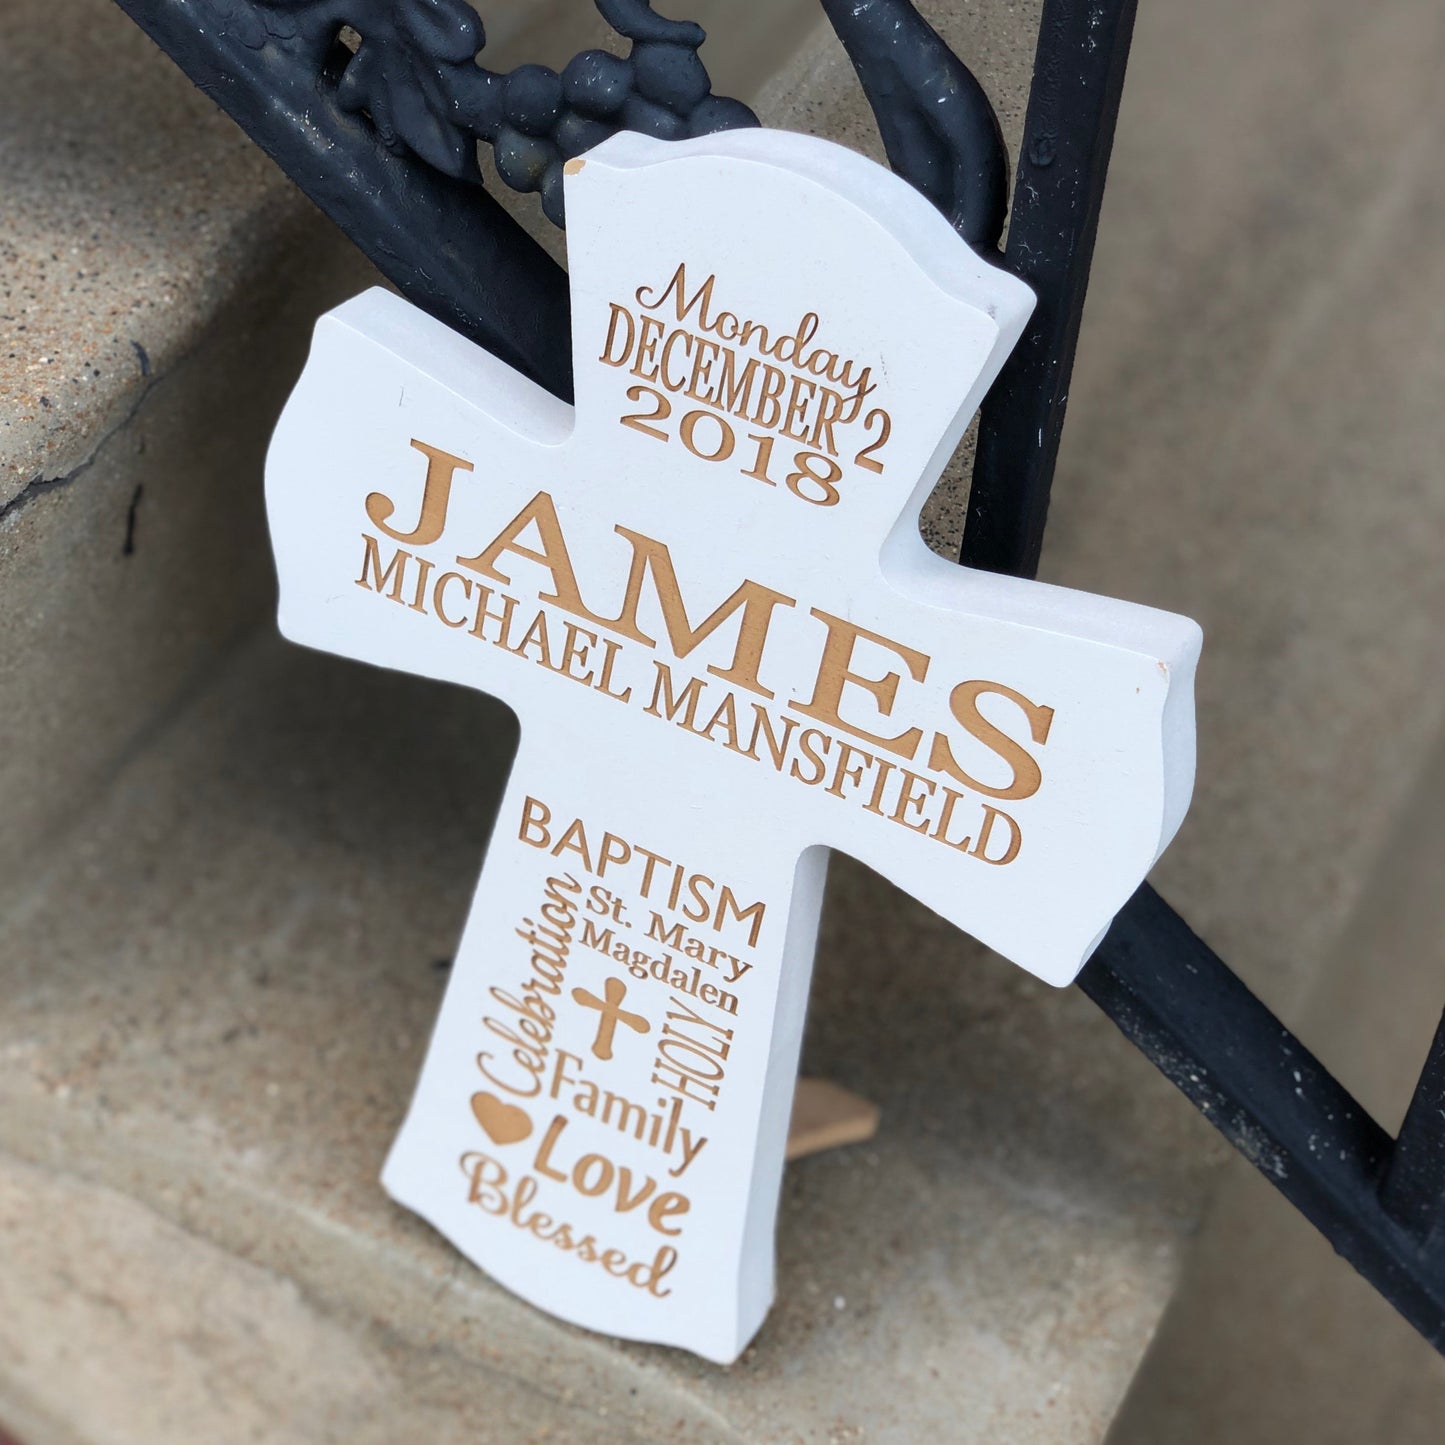 Personalized Wooden Cross - White